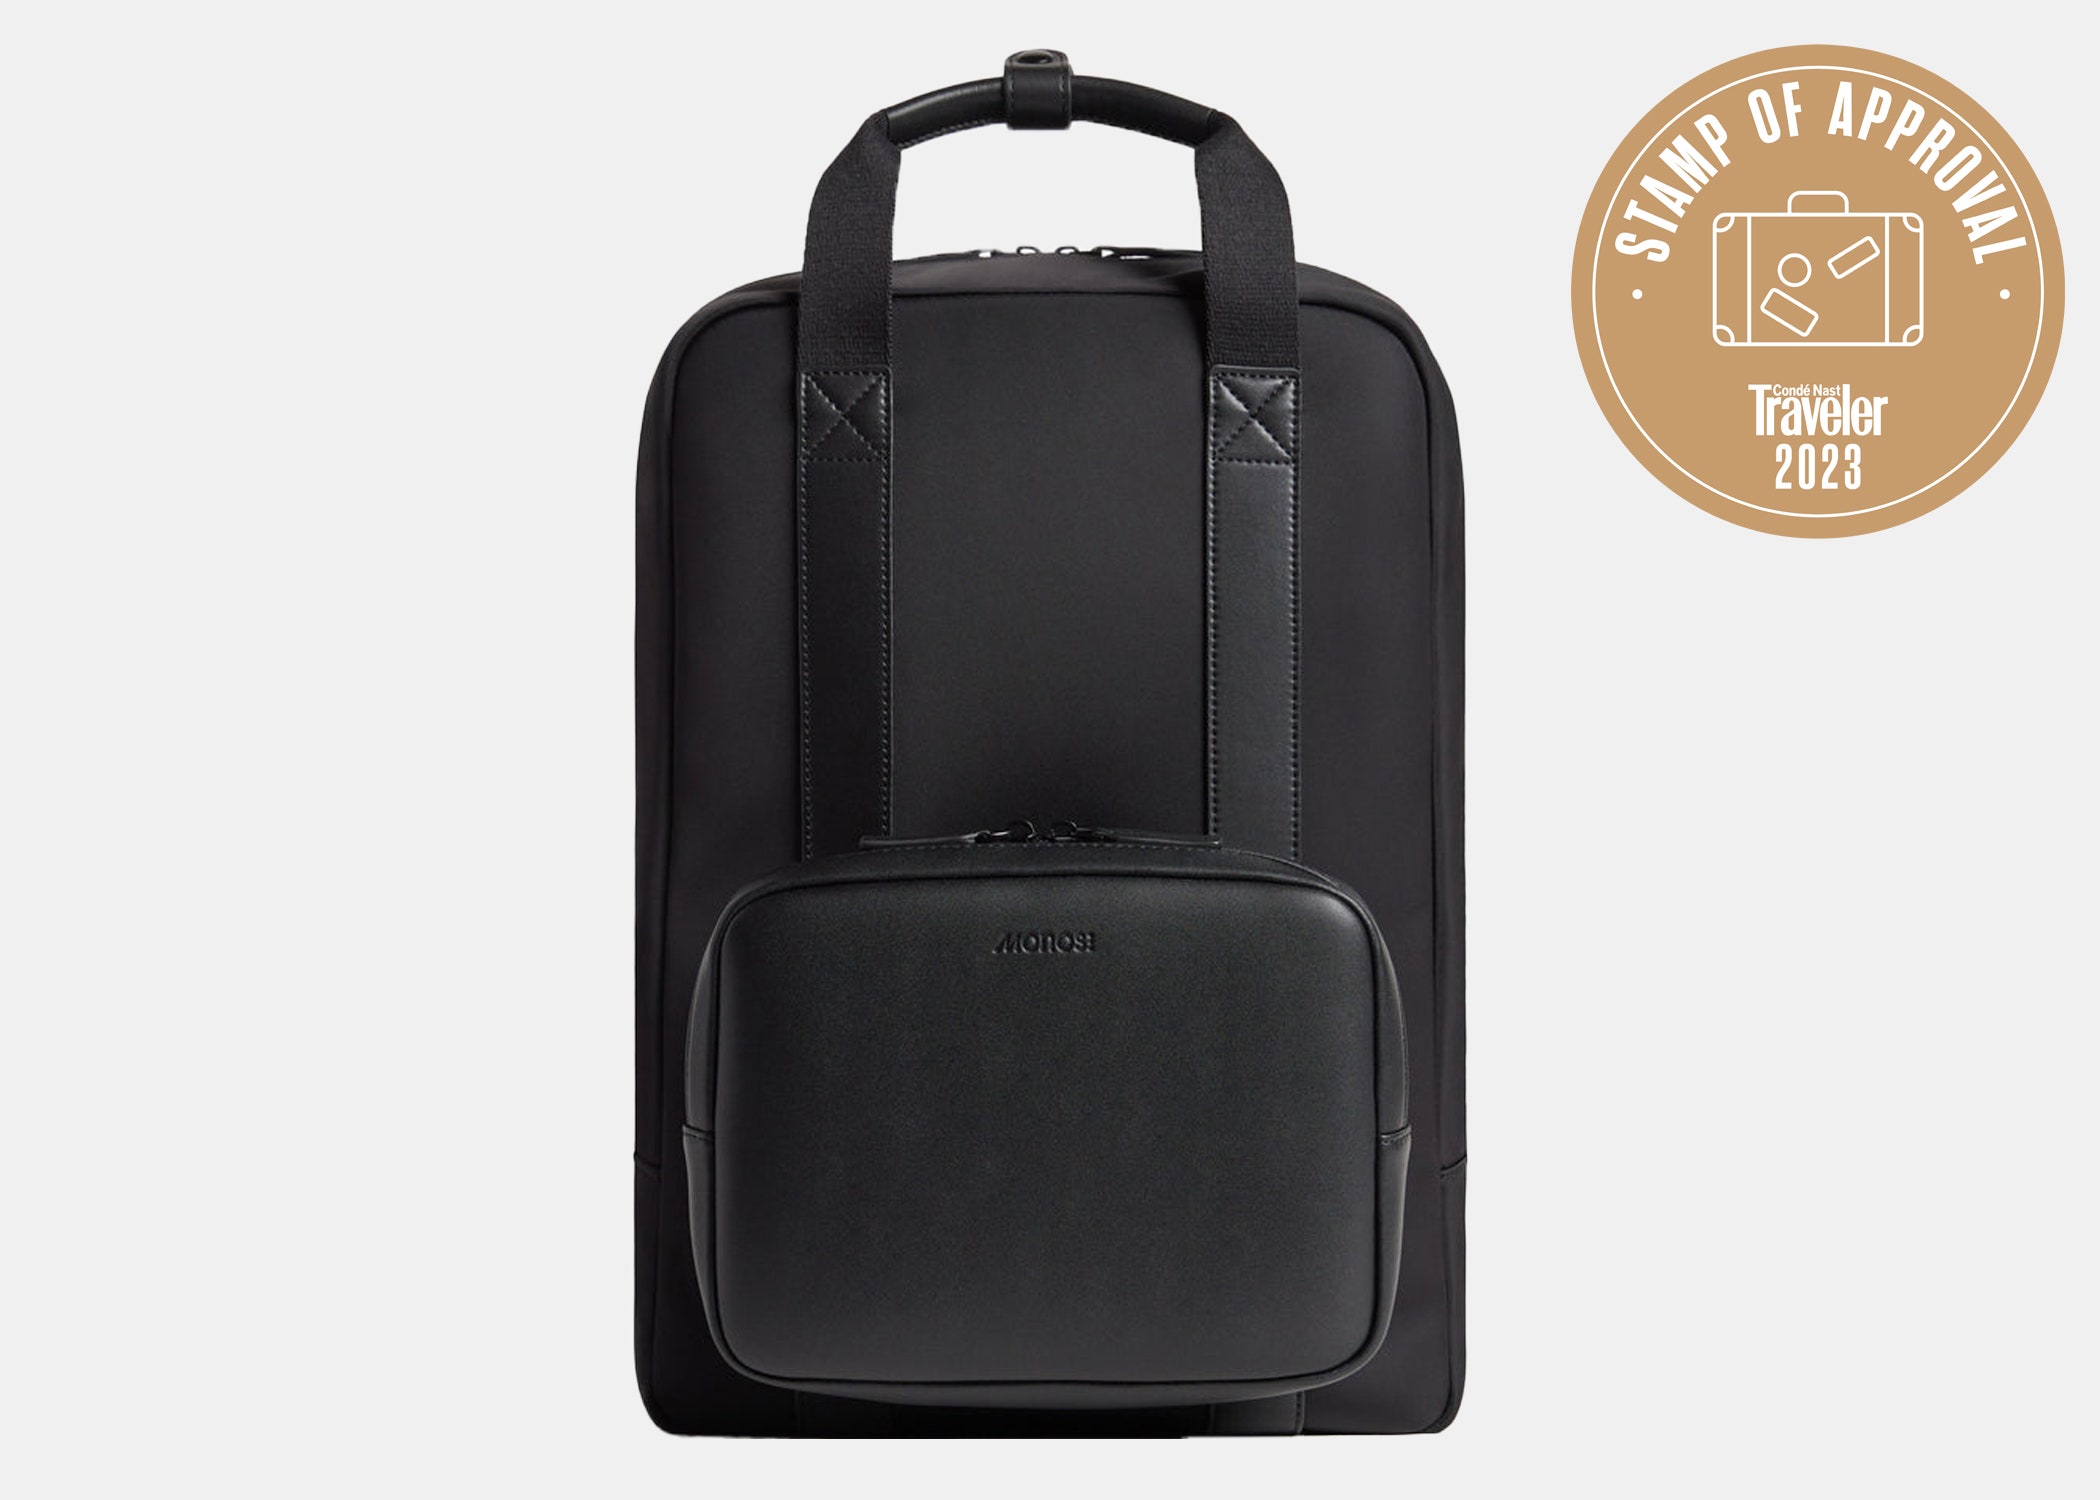 <p>This design-forward vegan leather bag is just the thing for travelers looking for a more elevated backpack. According to senior commerce editor <a href="https://www.cntraveler.com/contributor/madison-flager?mbid=synd_msn_rss&utm_source=msn&utm_medium=syndication">Madison Flager</a>, “it’s a comfortable bag to wear, and fits a lot—I’ve used it as an overnight bag. I do think it’s a great backpack, especially for commuters or for work trips where you want the practicality of a backpack while also looking polished." Whether you're headed on a weekend trip, carrying necessities on your daily commute, or using it as a carry-on bag, the Monos Metro backpack is a smart choice. The inner laptop compartment fits a 15" laptop, and there's a built-in trolley sleeve, top carry handle, and adjustable shoulder straps. The bag also comes with a Metro Kit, a modular pouch that snaps securely onto the front of the backpack, so you can keep essentials like a phone, earbuds, and hand sanitizer nearby.</p> <p><strong>Pros:</strong> Multiple pockets, trolley sleeve, and comes with a removable pouch<br> <strong>Cons:</strong> Not very lightweight and can feel bulky</p> $215, Monos. <a href="https://monos.com/products/metro-backpack?variant=32562632851530">Get it now!</a><p>Sign up to receive the latest news, expert tips, and inspiration on all things travel</p><a href="https://www.cntraveler.com/newsletter/the-daily?sourceCode=msnsend">Inspire Me</a>